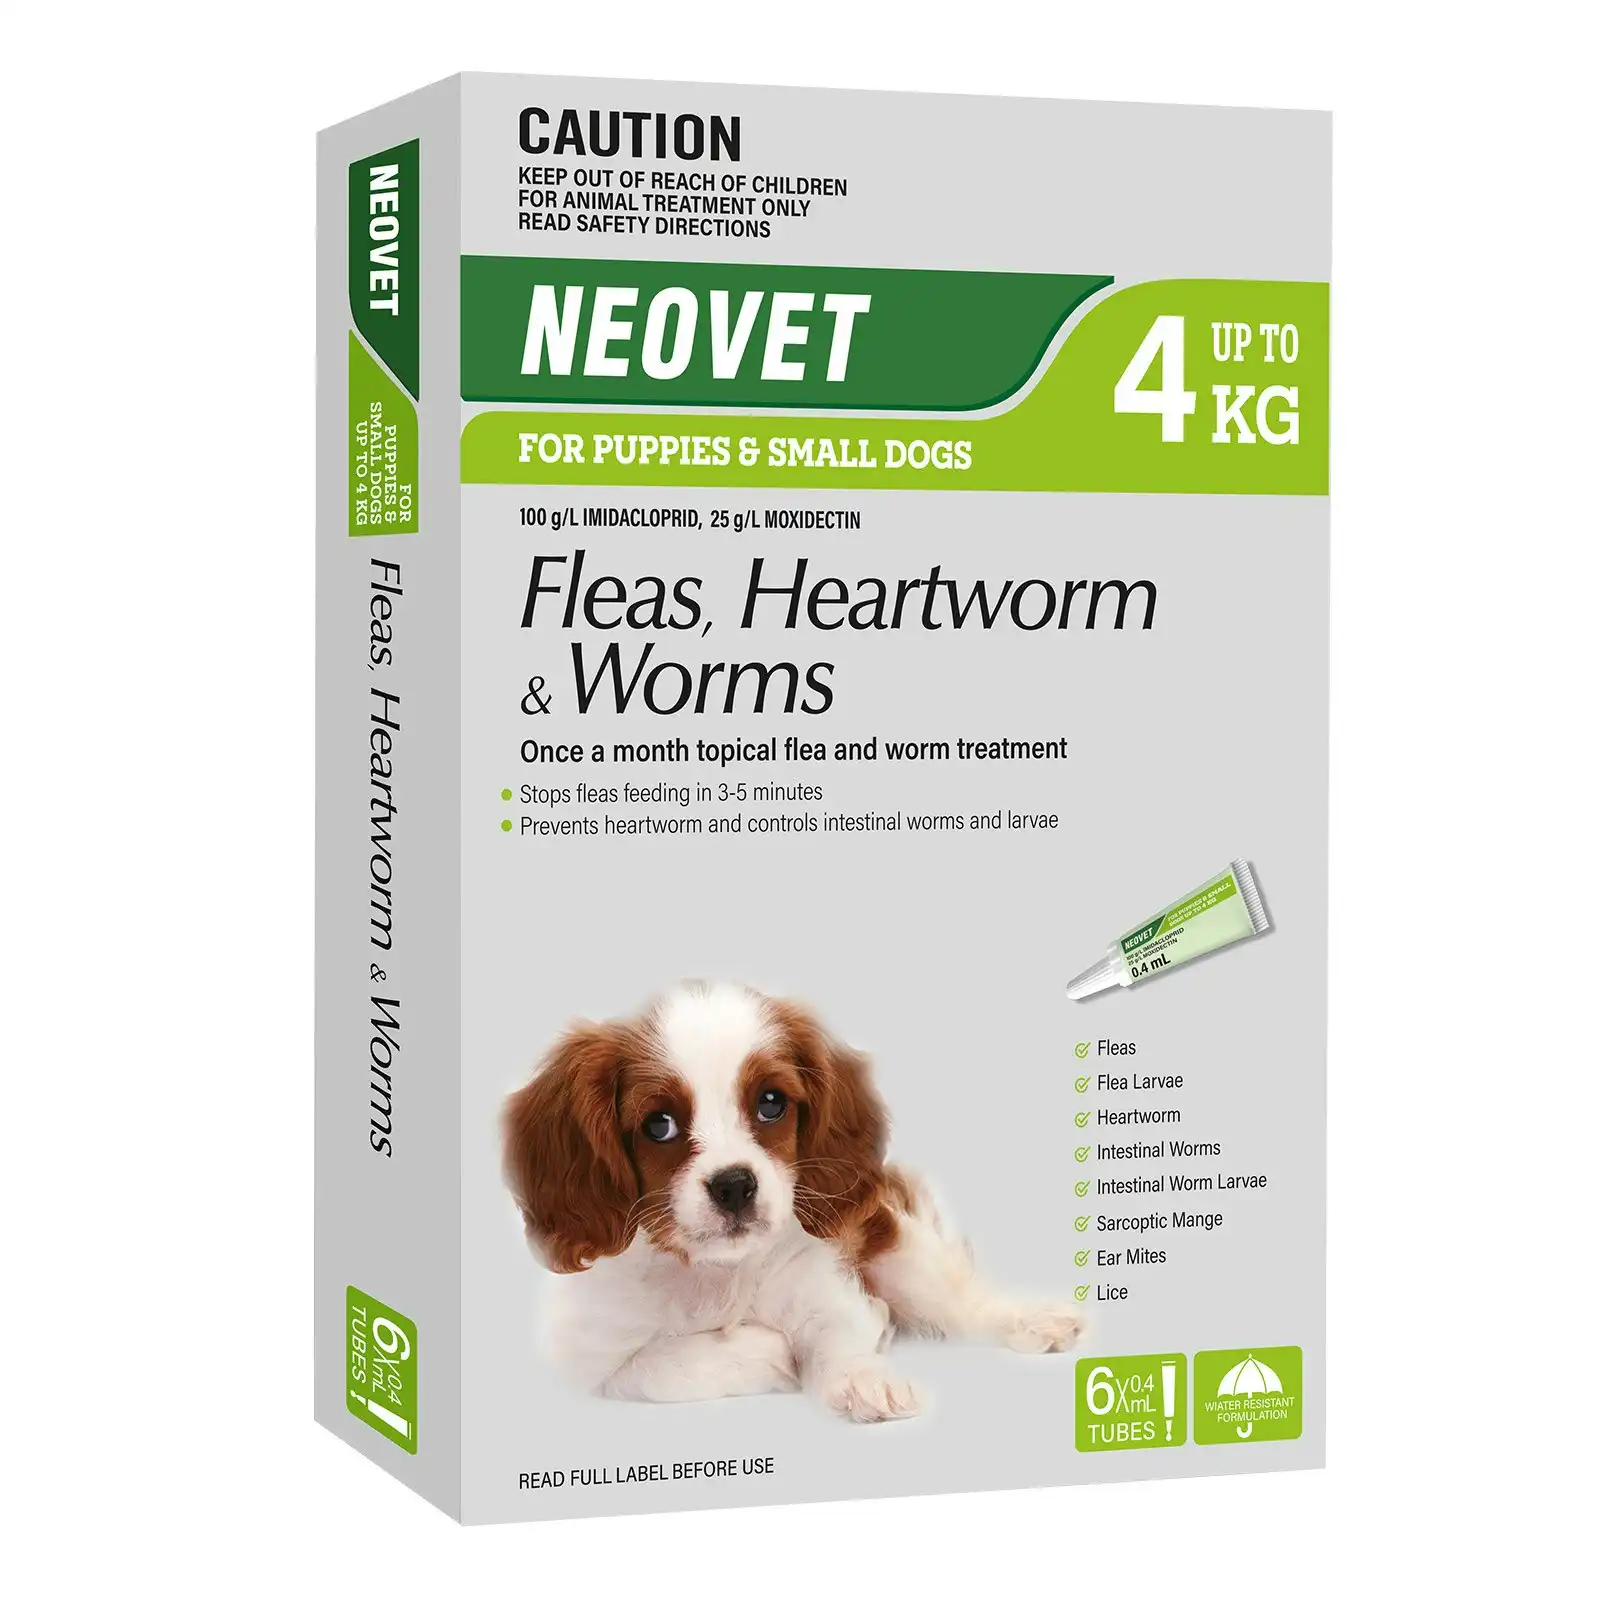 Neovet for Puppies and Small Dogs Up To 4 Kg (GREEN) 6 Pack